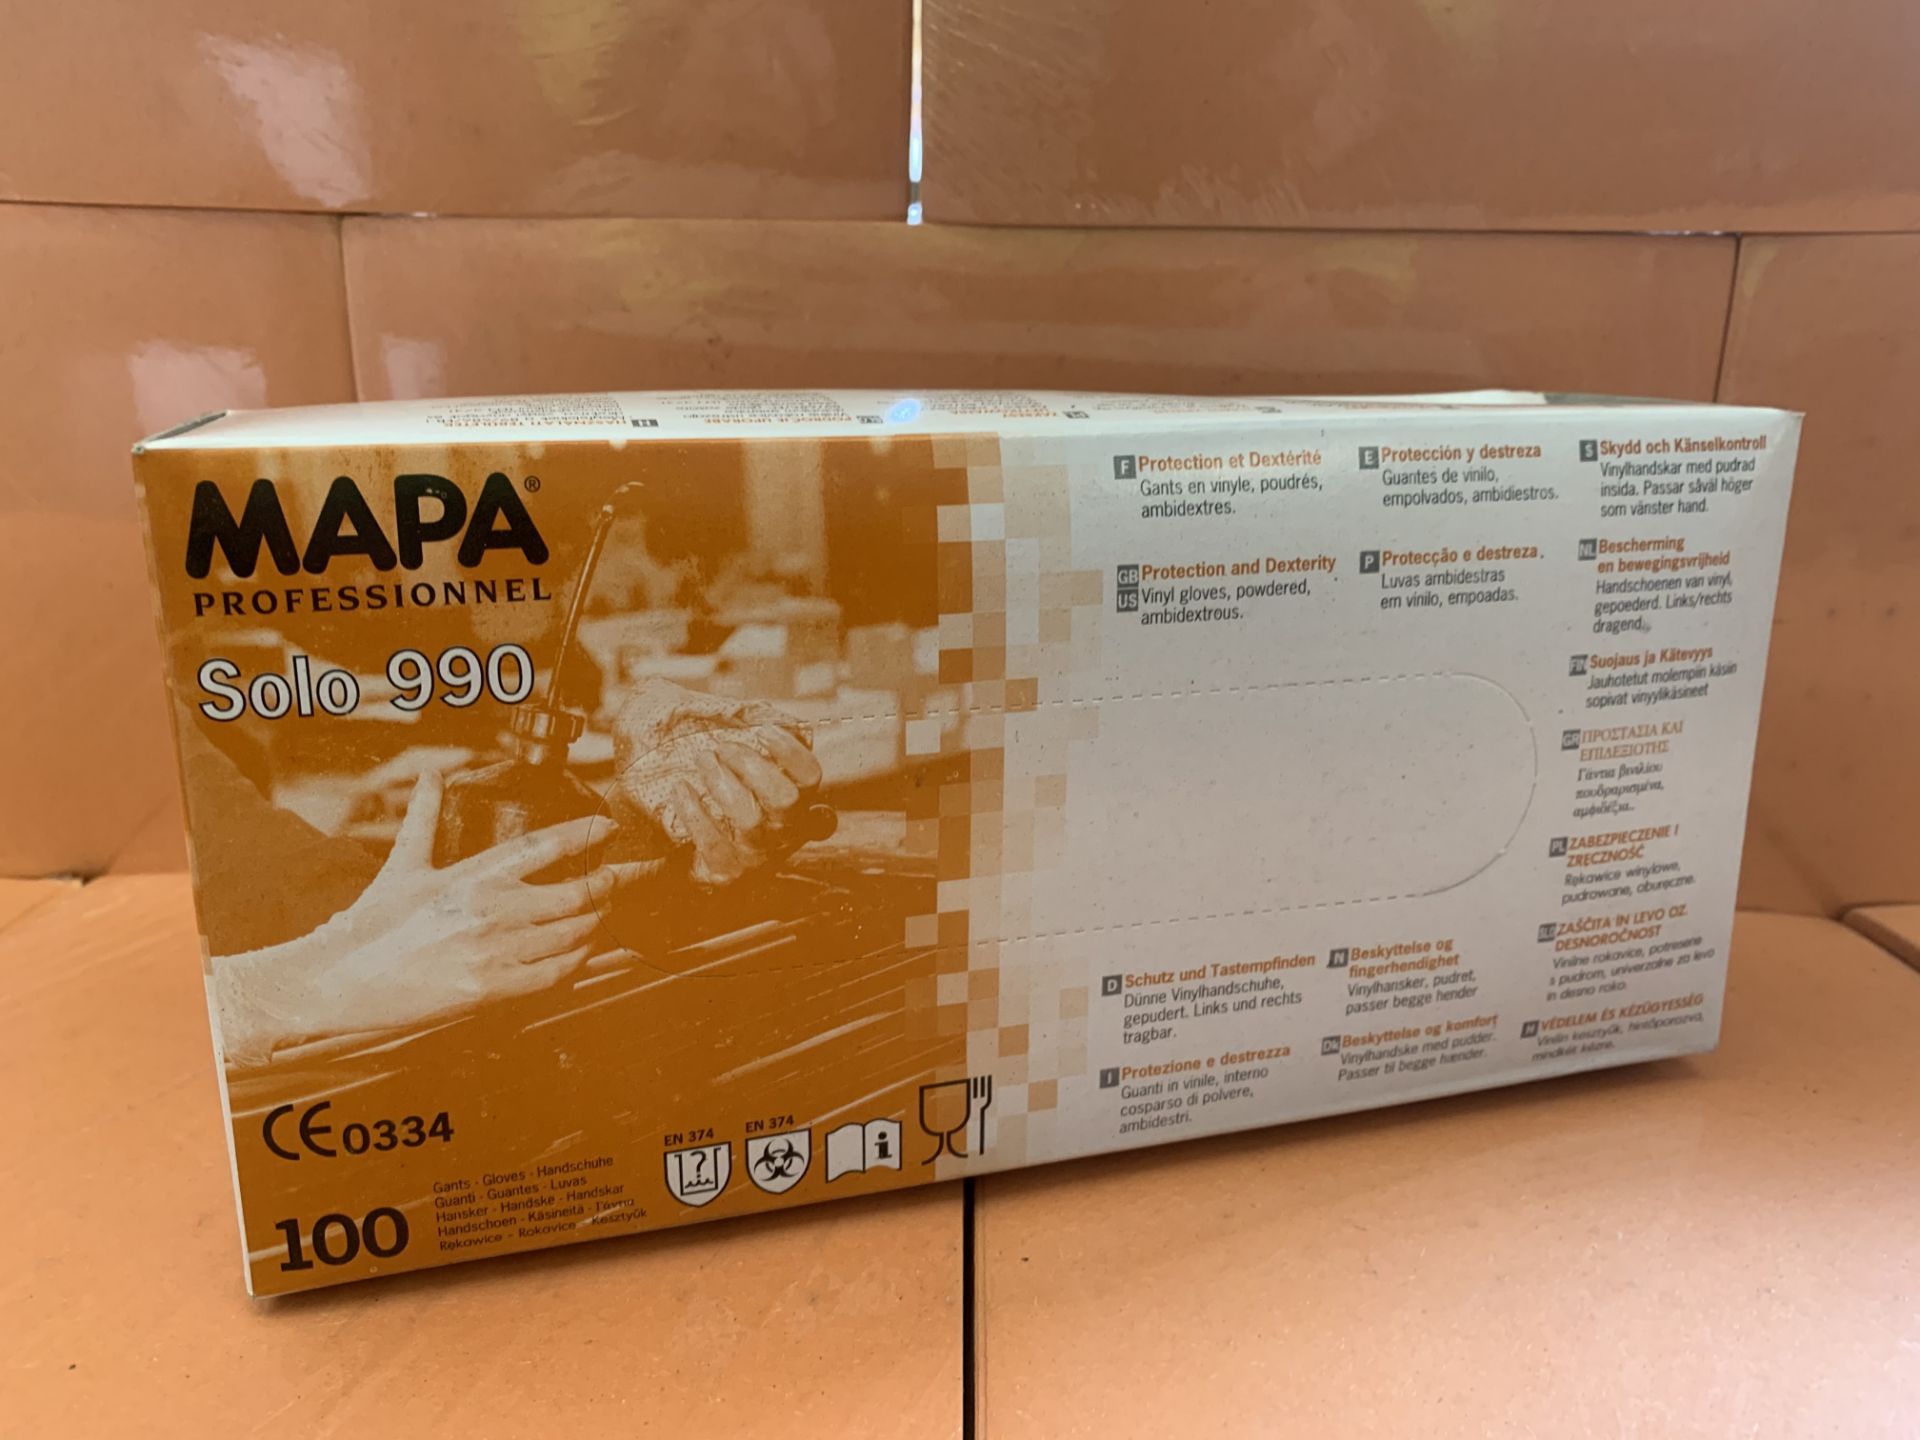 10 X PACKS OF 100 MAPA SOLO 990 PROFESSIONAL GLOVES (178/13)